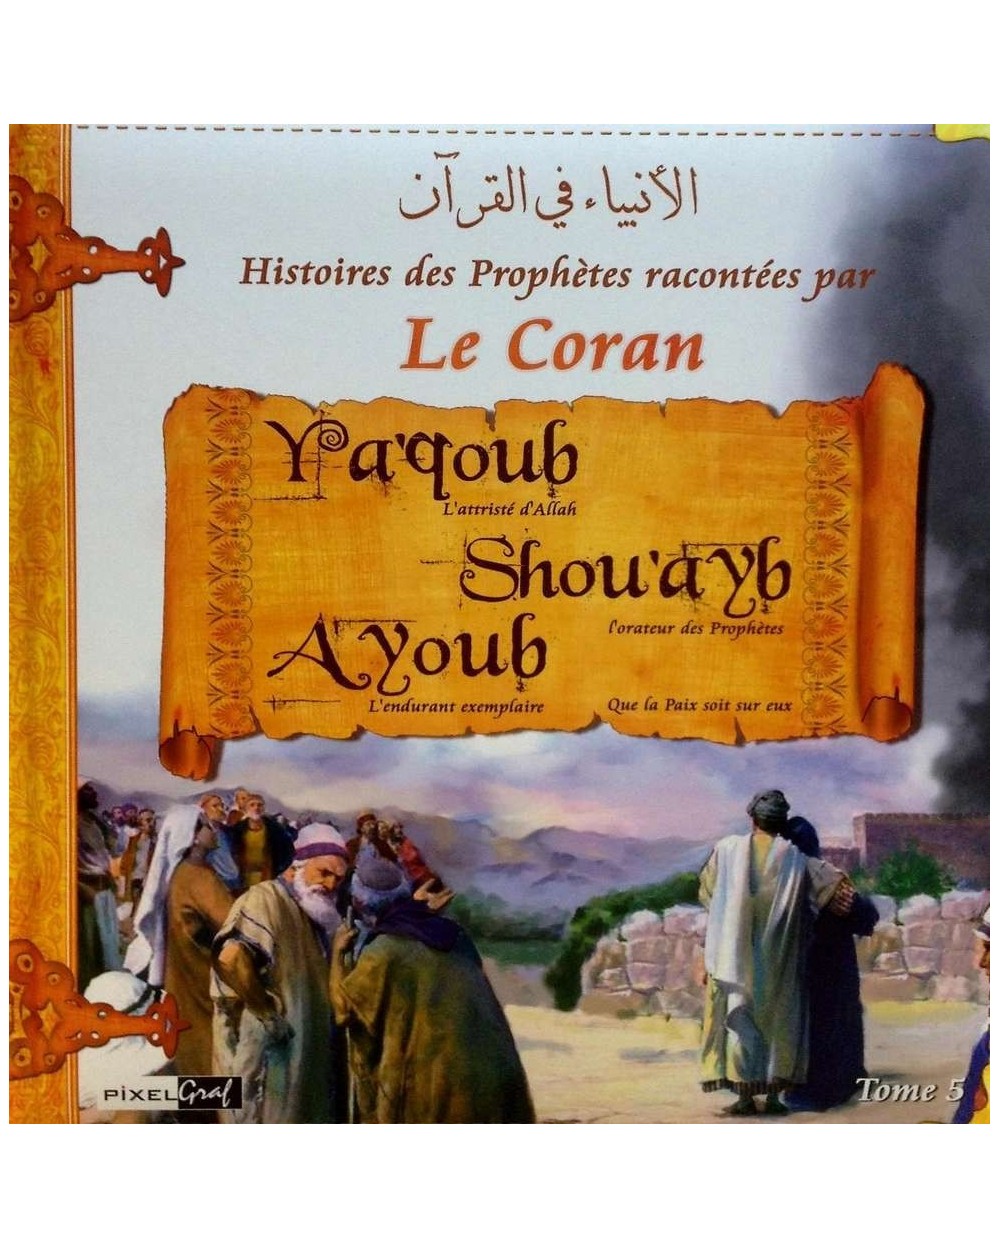 Stories of the prophets told by the Koran - Tome 5 (YACOUB, SHOU'AYB, AYOUB)